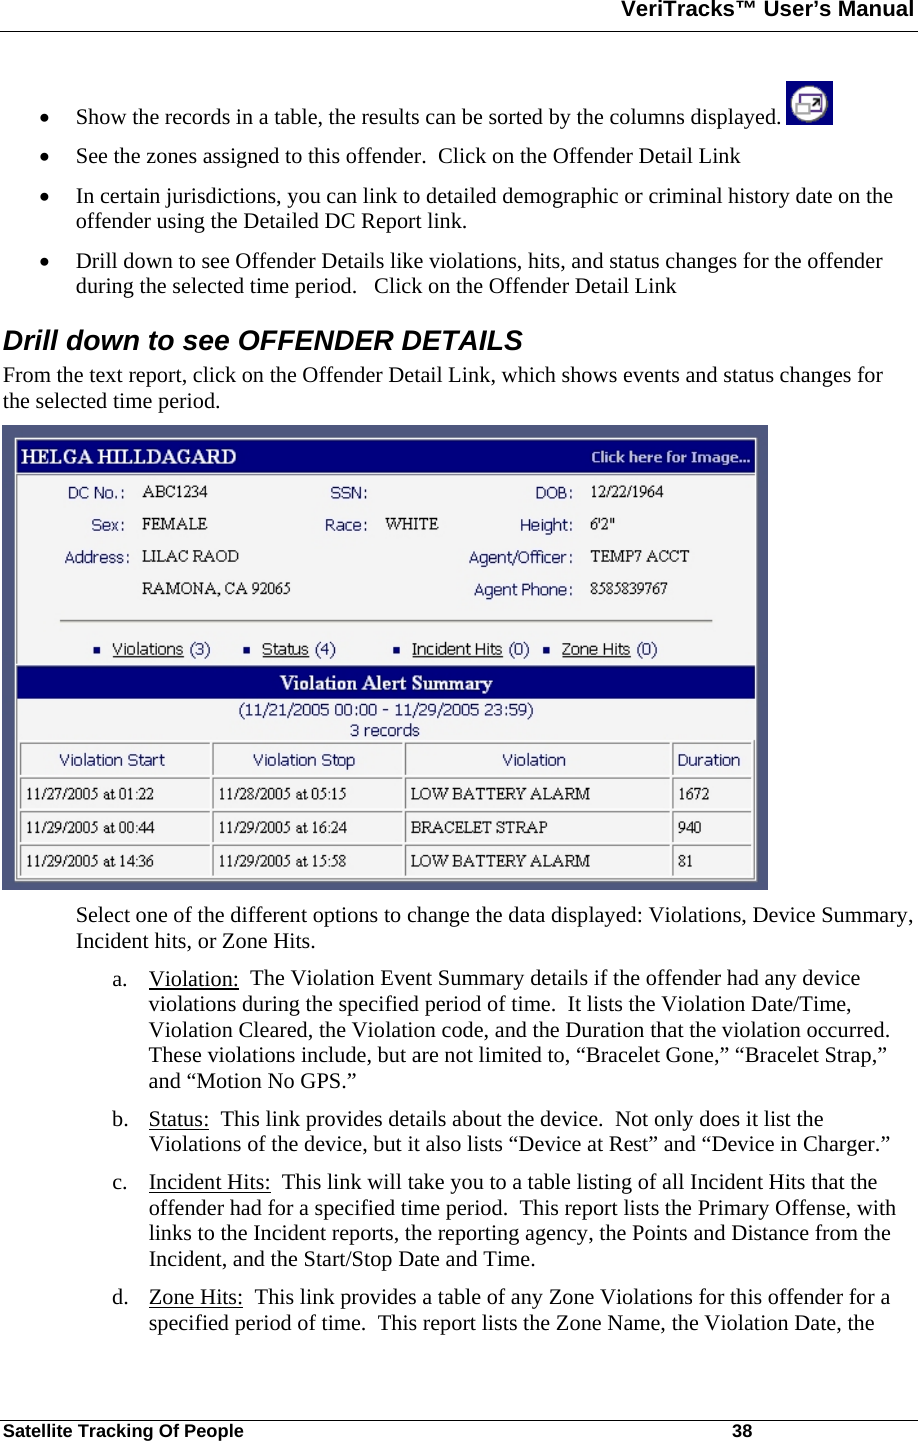 VeriTracks™ User’s Manual  Satellite Tracking Of People       38 • Show the records in a table, the results can be sorted by the columns displayed.   • See the zones assigned to this offender.  Click on the Offender Detail Link • In certain jurisdictions, you can link to detailed demographic or criminal history date on the offender using the Detailed DC Report link.  • Drill down to see Offender Details like violations, hits, and status changes for the offender during the selected time period.   Click on the Offender Detail Link Drill down to see OFFENDER DETAILS From the text report, click on the Offender Detail Link, which shows events and status changes for the selected time period.    Select one of the different options to change the data displayed: Violations, Device Summary, Incident hits, or Zone Hits.   a. Violation:  The Violation Event Summary details if the offender had any device violations during the specified period of time.  It lists the Violation Date/Time, Violation Cleared, the Violation code, and the Duration that the violation occurred.  These violations include, but are not limited to, “Bracelet Gone,” “Bracelet Strap,” and “Motion No GPS.” b. Status:  This link provides details about the device.  Not only does it list the Violations of the device, but it also lists “Device at Rest” and “Device in Charger.” c. Incident Hits:  This link will take you to a table listing of all Incident Hits that the offender had for a specified time period.  This report lists the Primary Offense, with links to the Incident reports, the reporting agency, the Points and Distance from the Incident, and the Start/Stop Date and Time. d. Zone Hits:  This link provides a table of any Zone Violations for this offender for a specified period of time.  This report lists the Zone Name, the Violation Date, the 